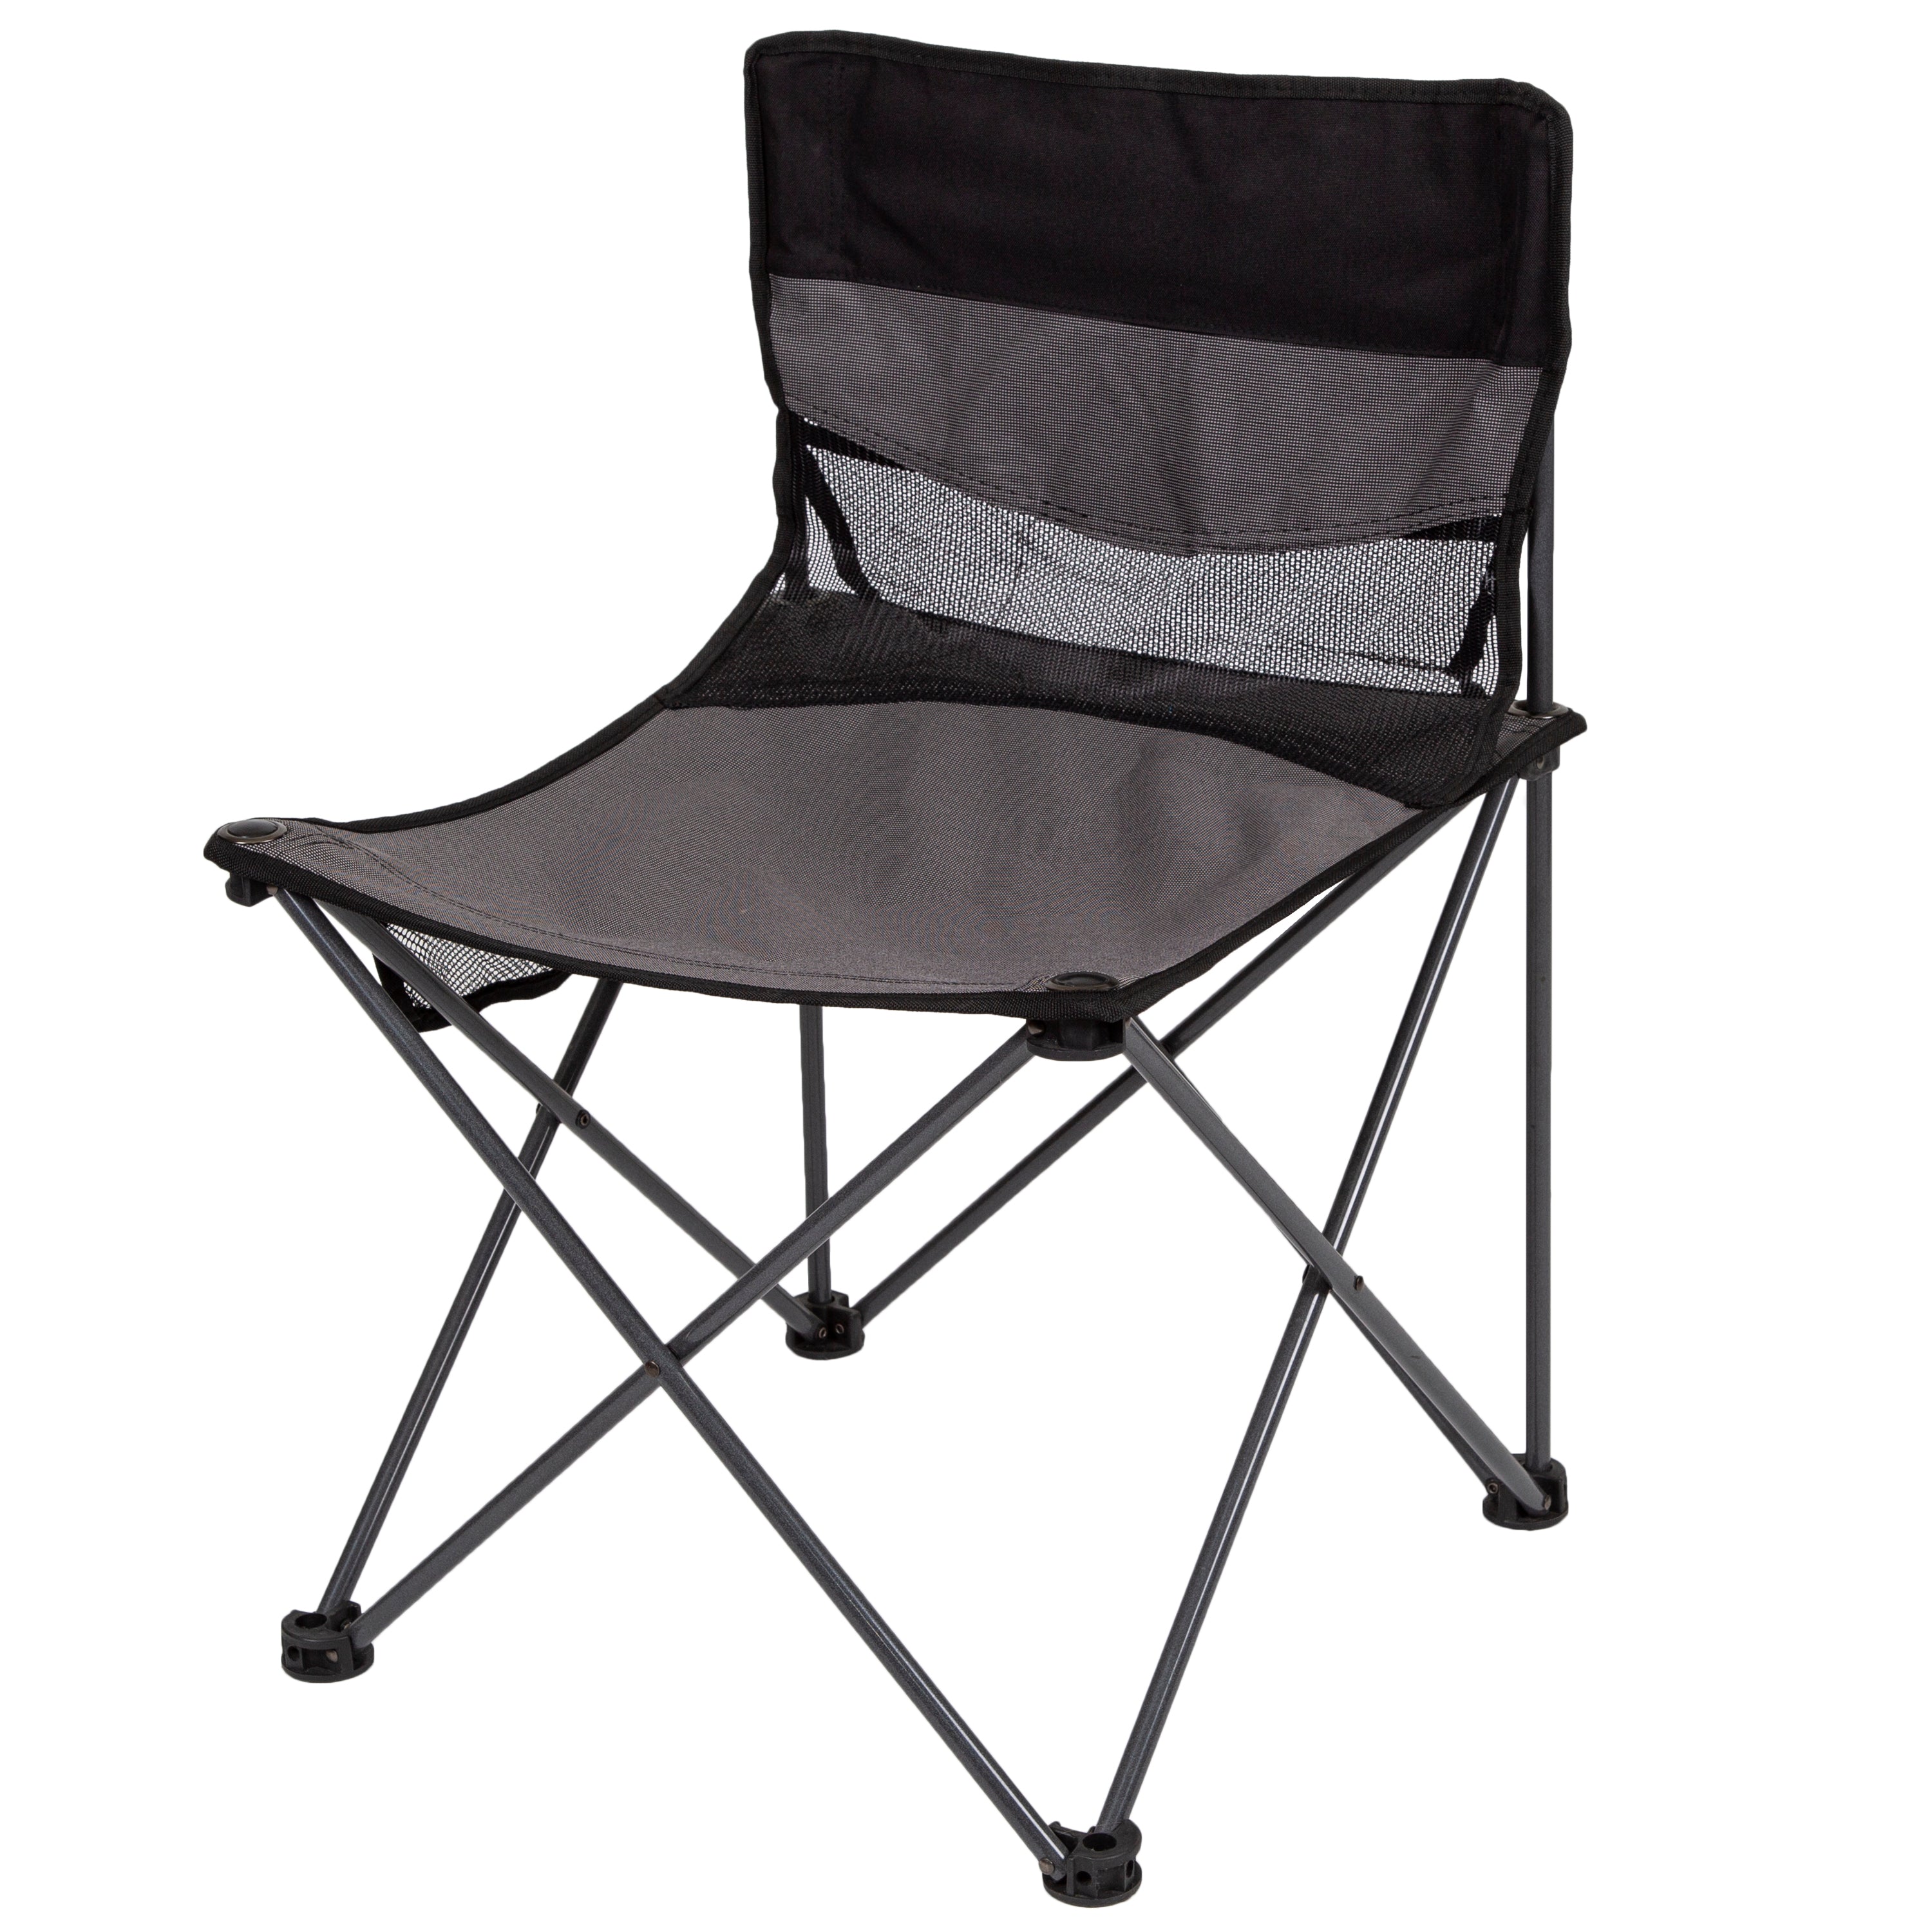 Apex Deluxe Sling Back Chair